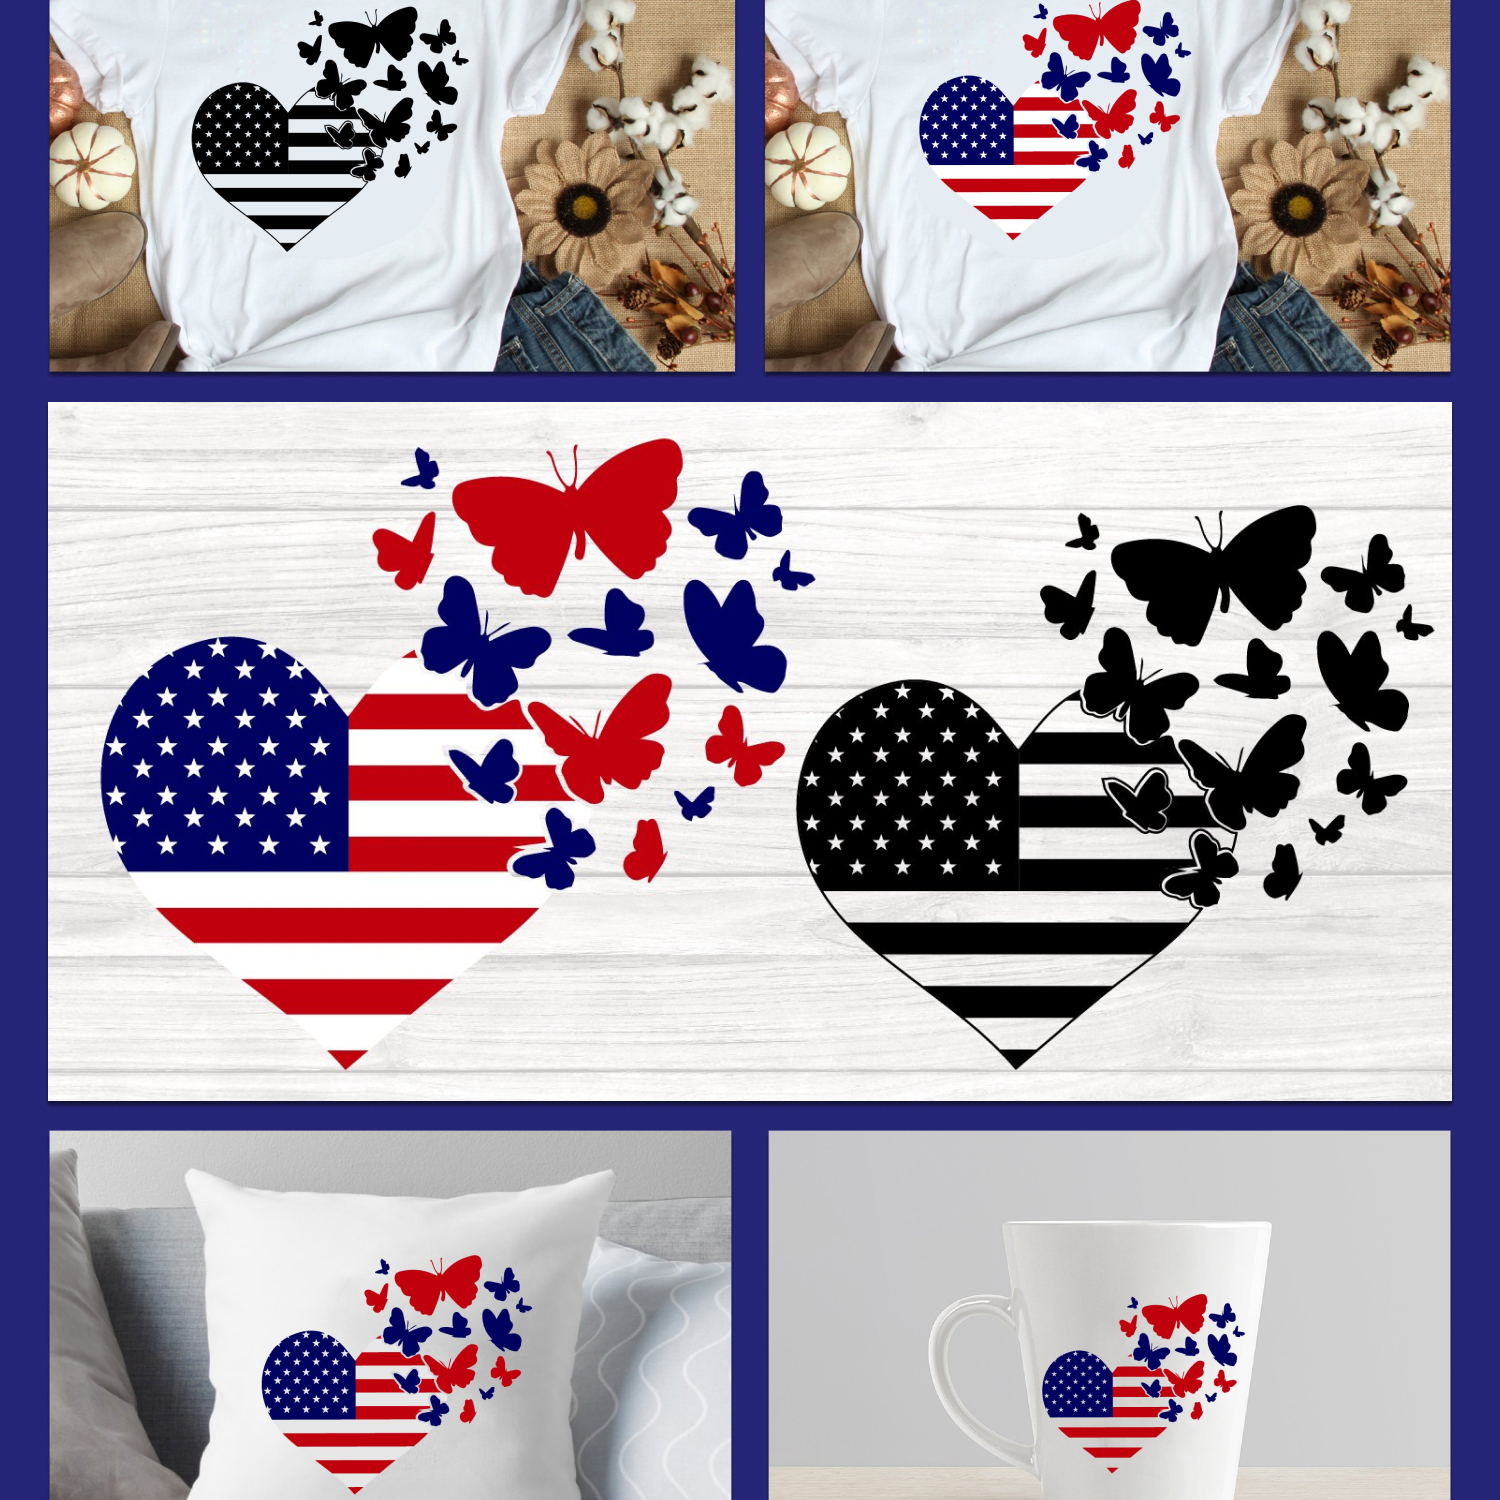 American flag heart preview.